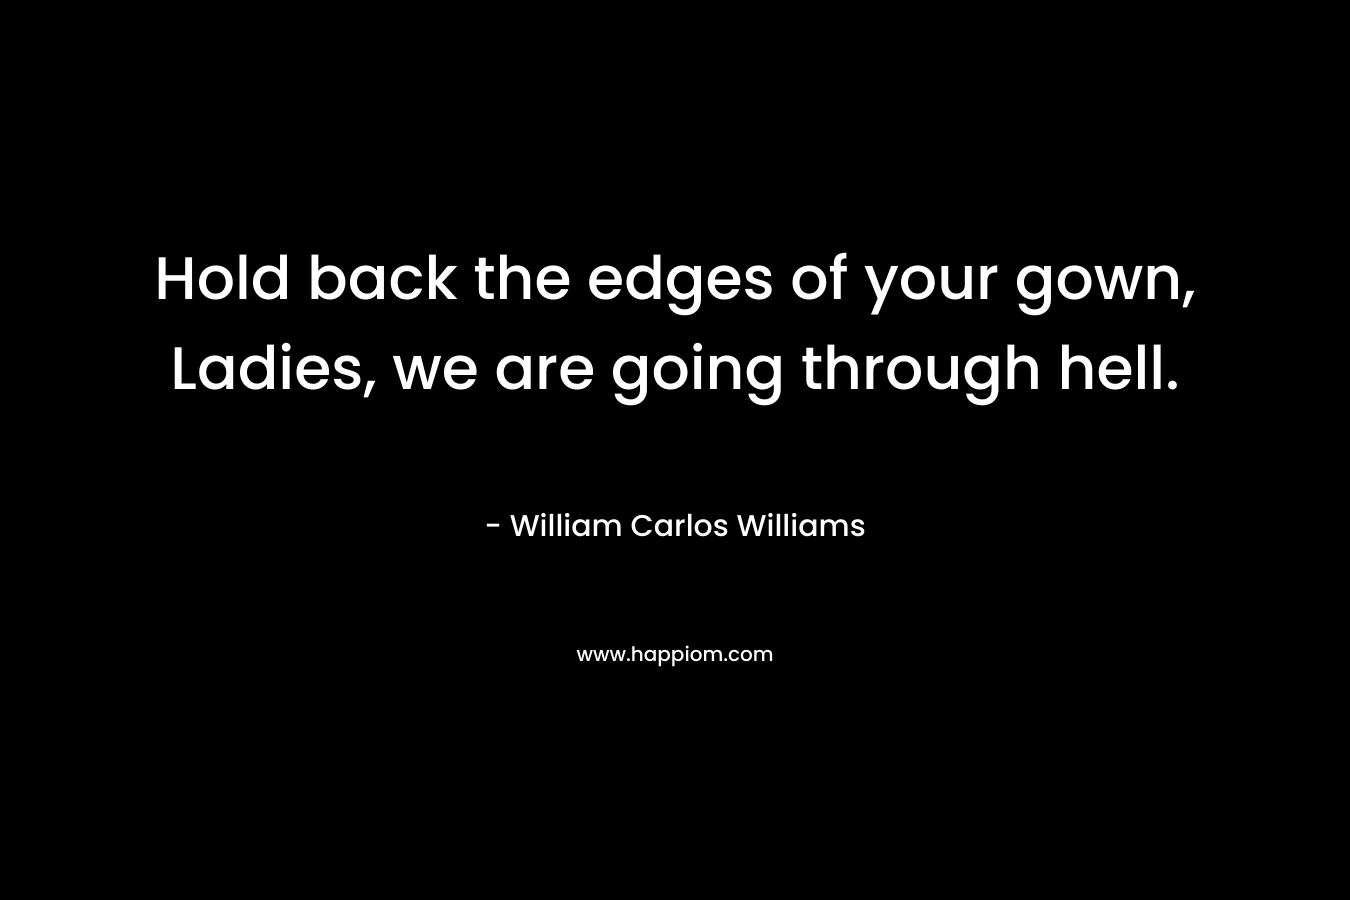 Hold back the edges of your gown, Ladies, we are going through hell. – William Carlos Williams